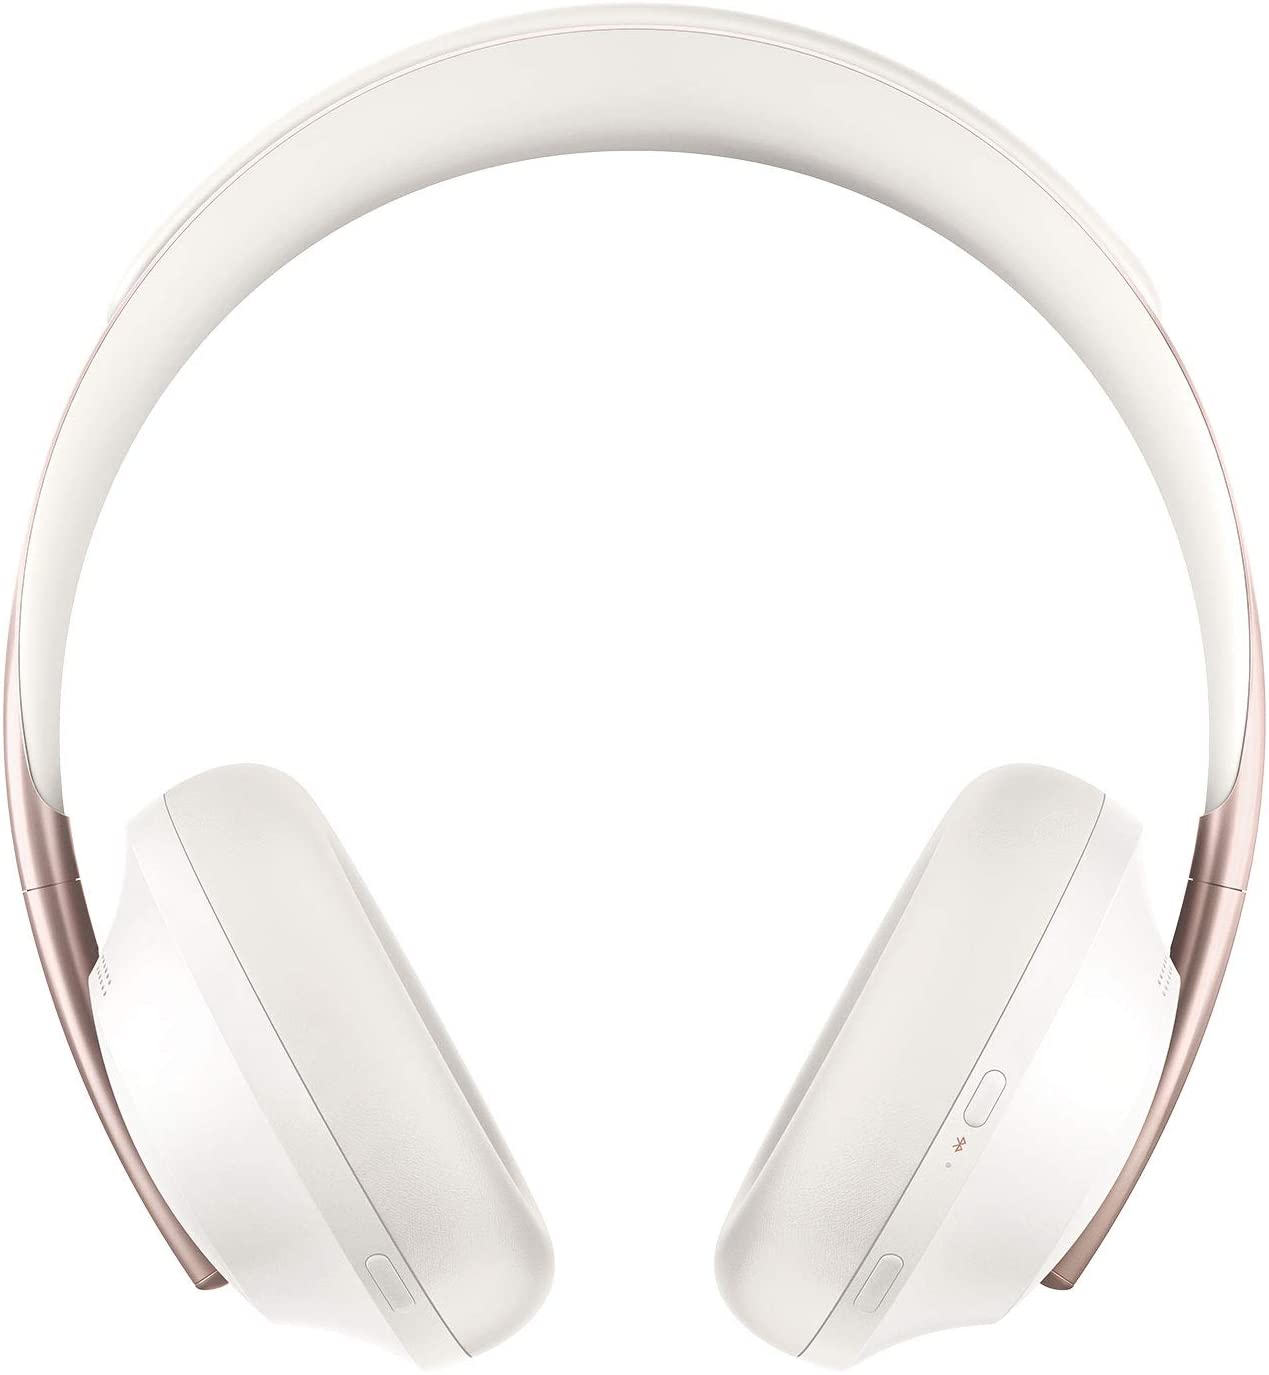 Bose Noise Cancelling Wireless Bluetooth Headphones 700 On Sale for 25% Off [Deal]